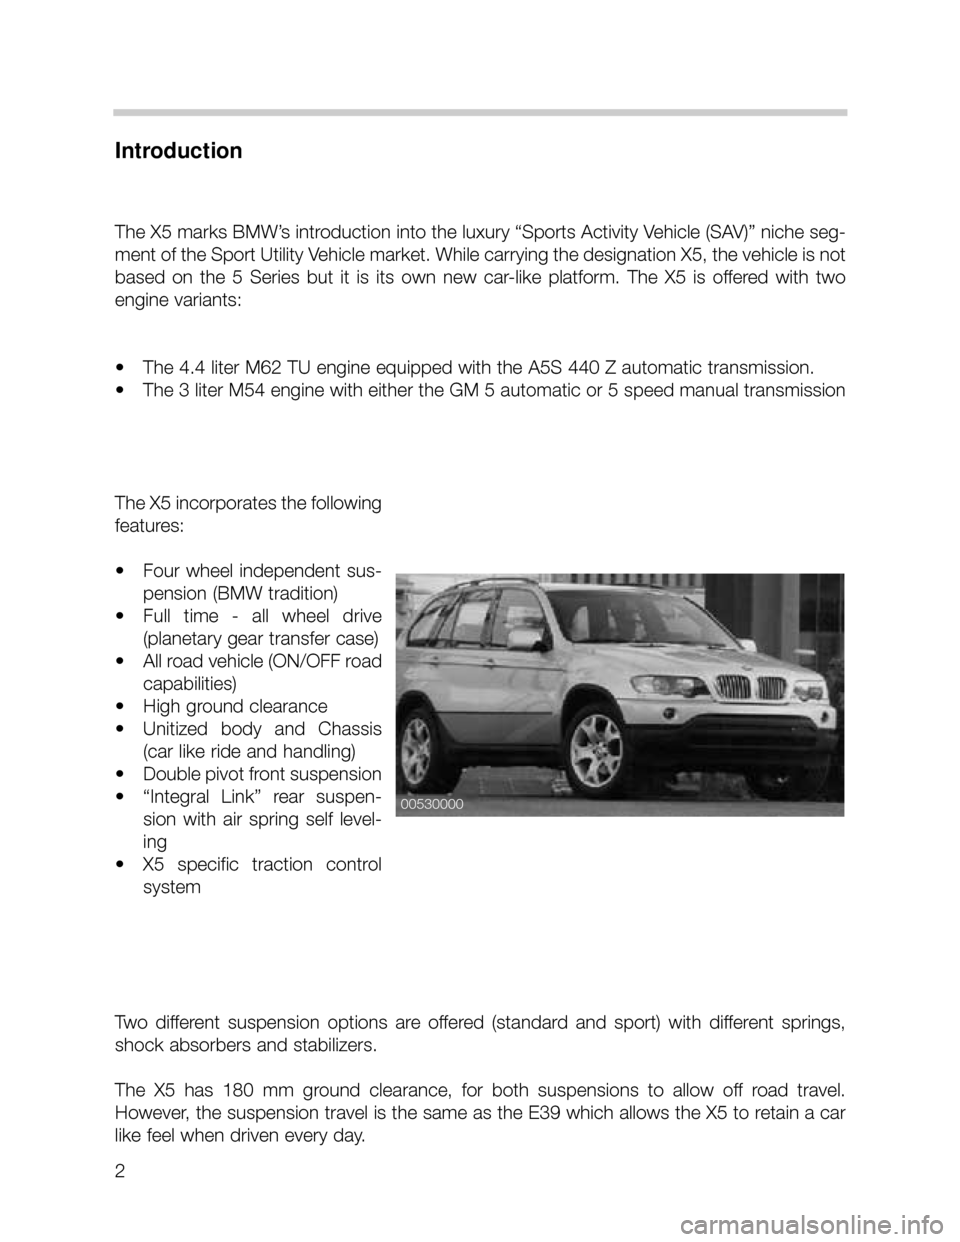 BMW X5 2002 E53 Workshop Manual 2
Introduction
The X5 marks BMW’s introduction into the luxury “Sports Activity Vehicle (SAV)” niche seg-
ment of the Sport Utility Vehicle market. While carrying the designation X5, the vehicle